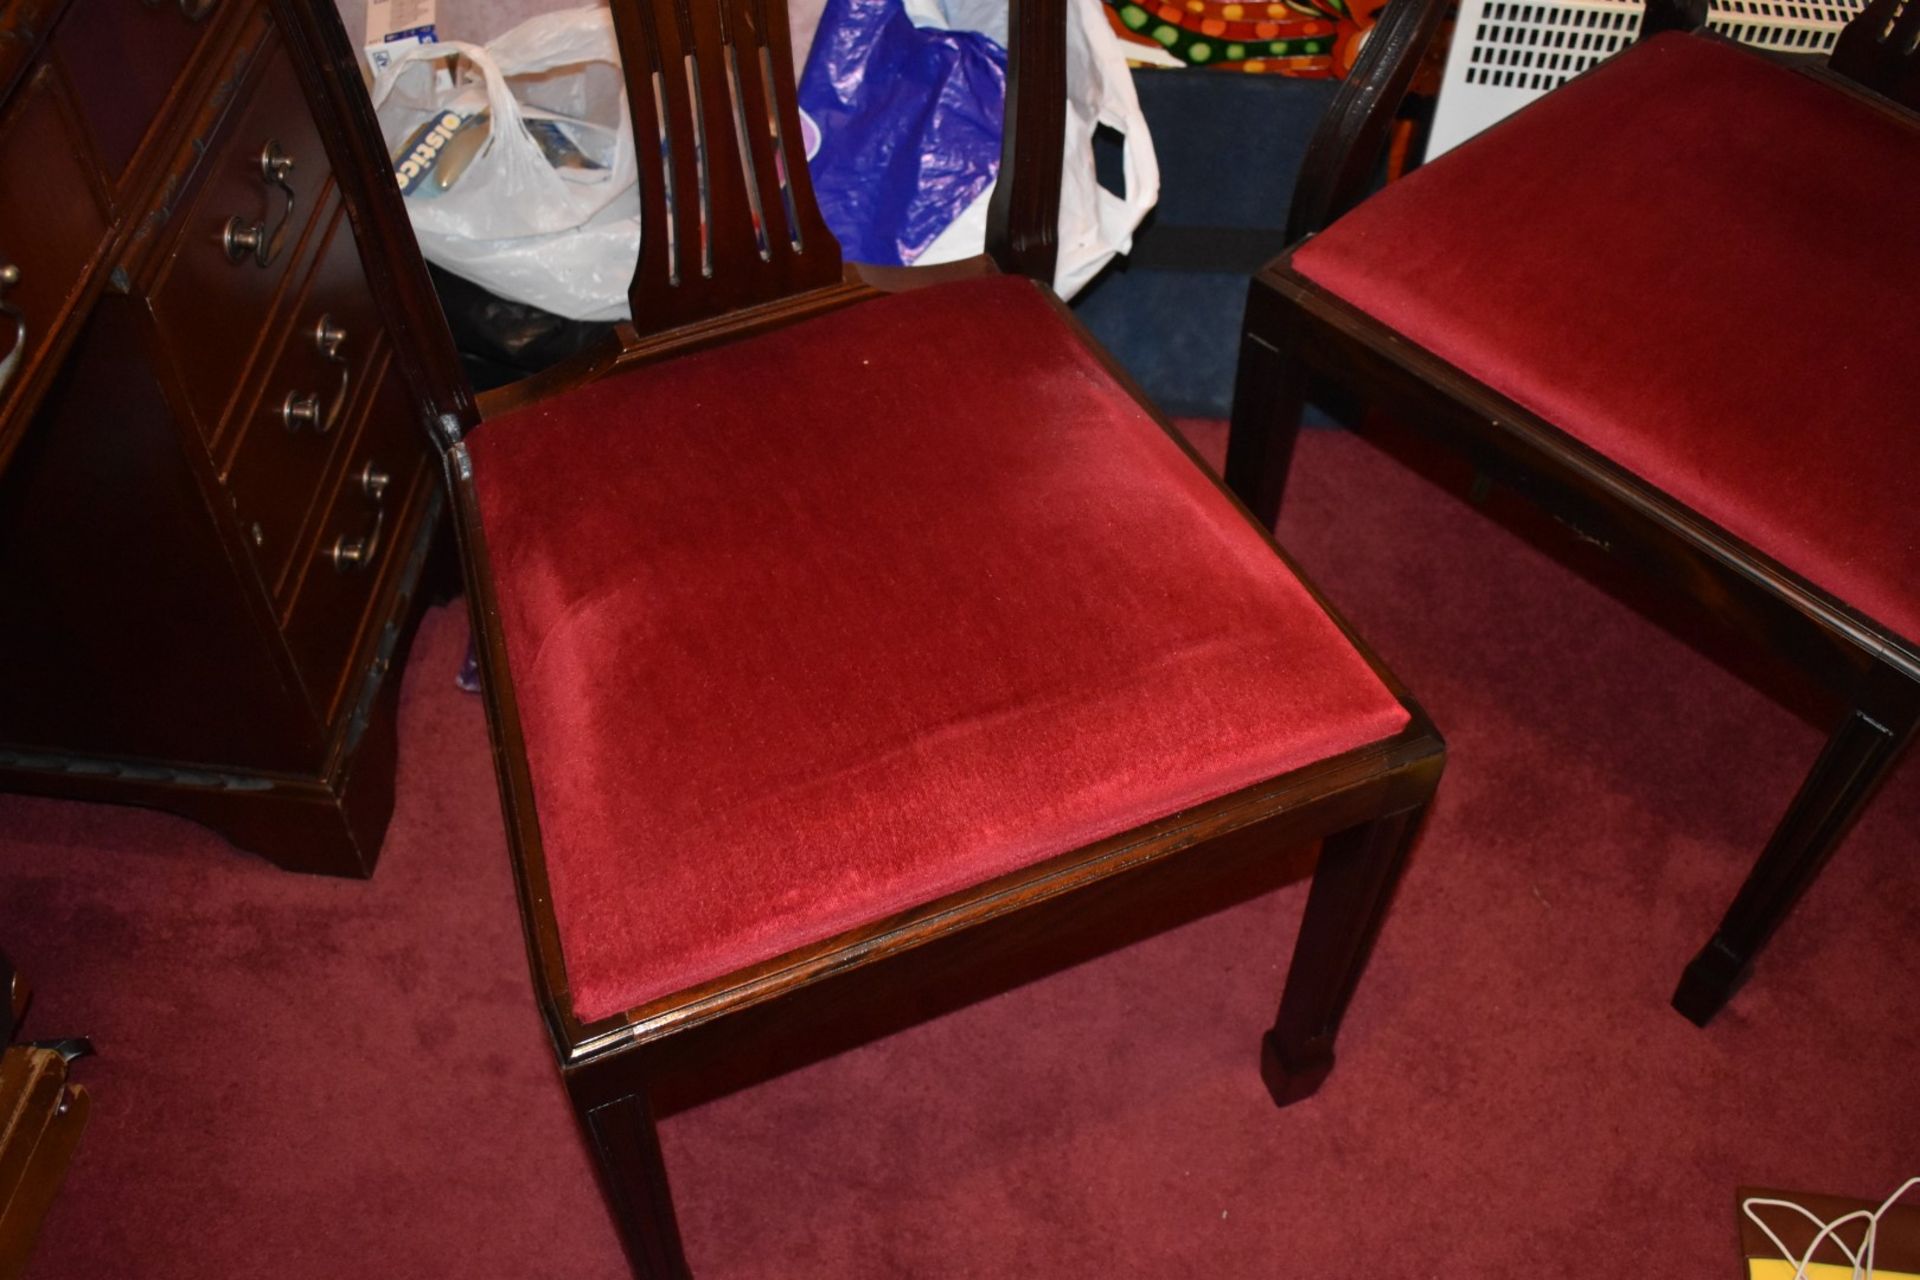 2 x Mahogany Shieldback Dining Chairs With Cushioned Seats Upholstered in Red Fabric - CL579 - No - Image 2 of 4